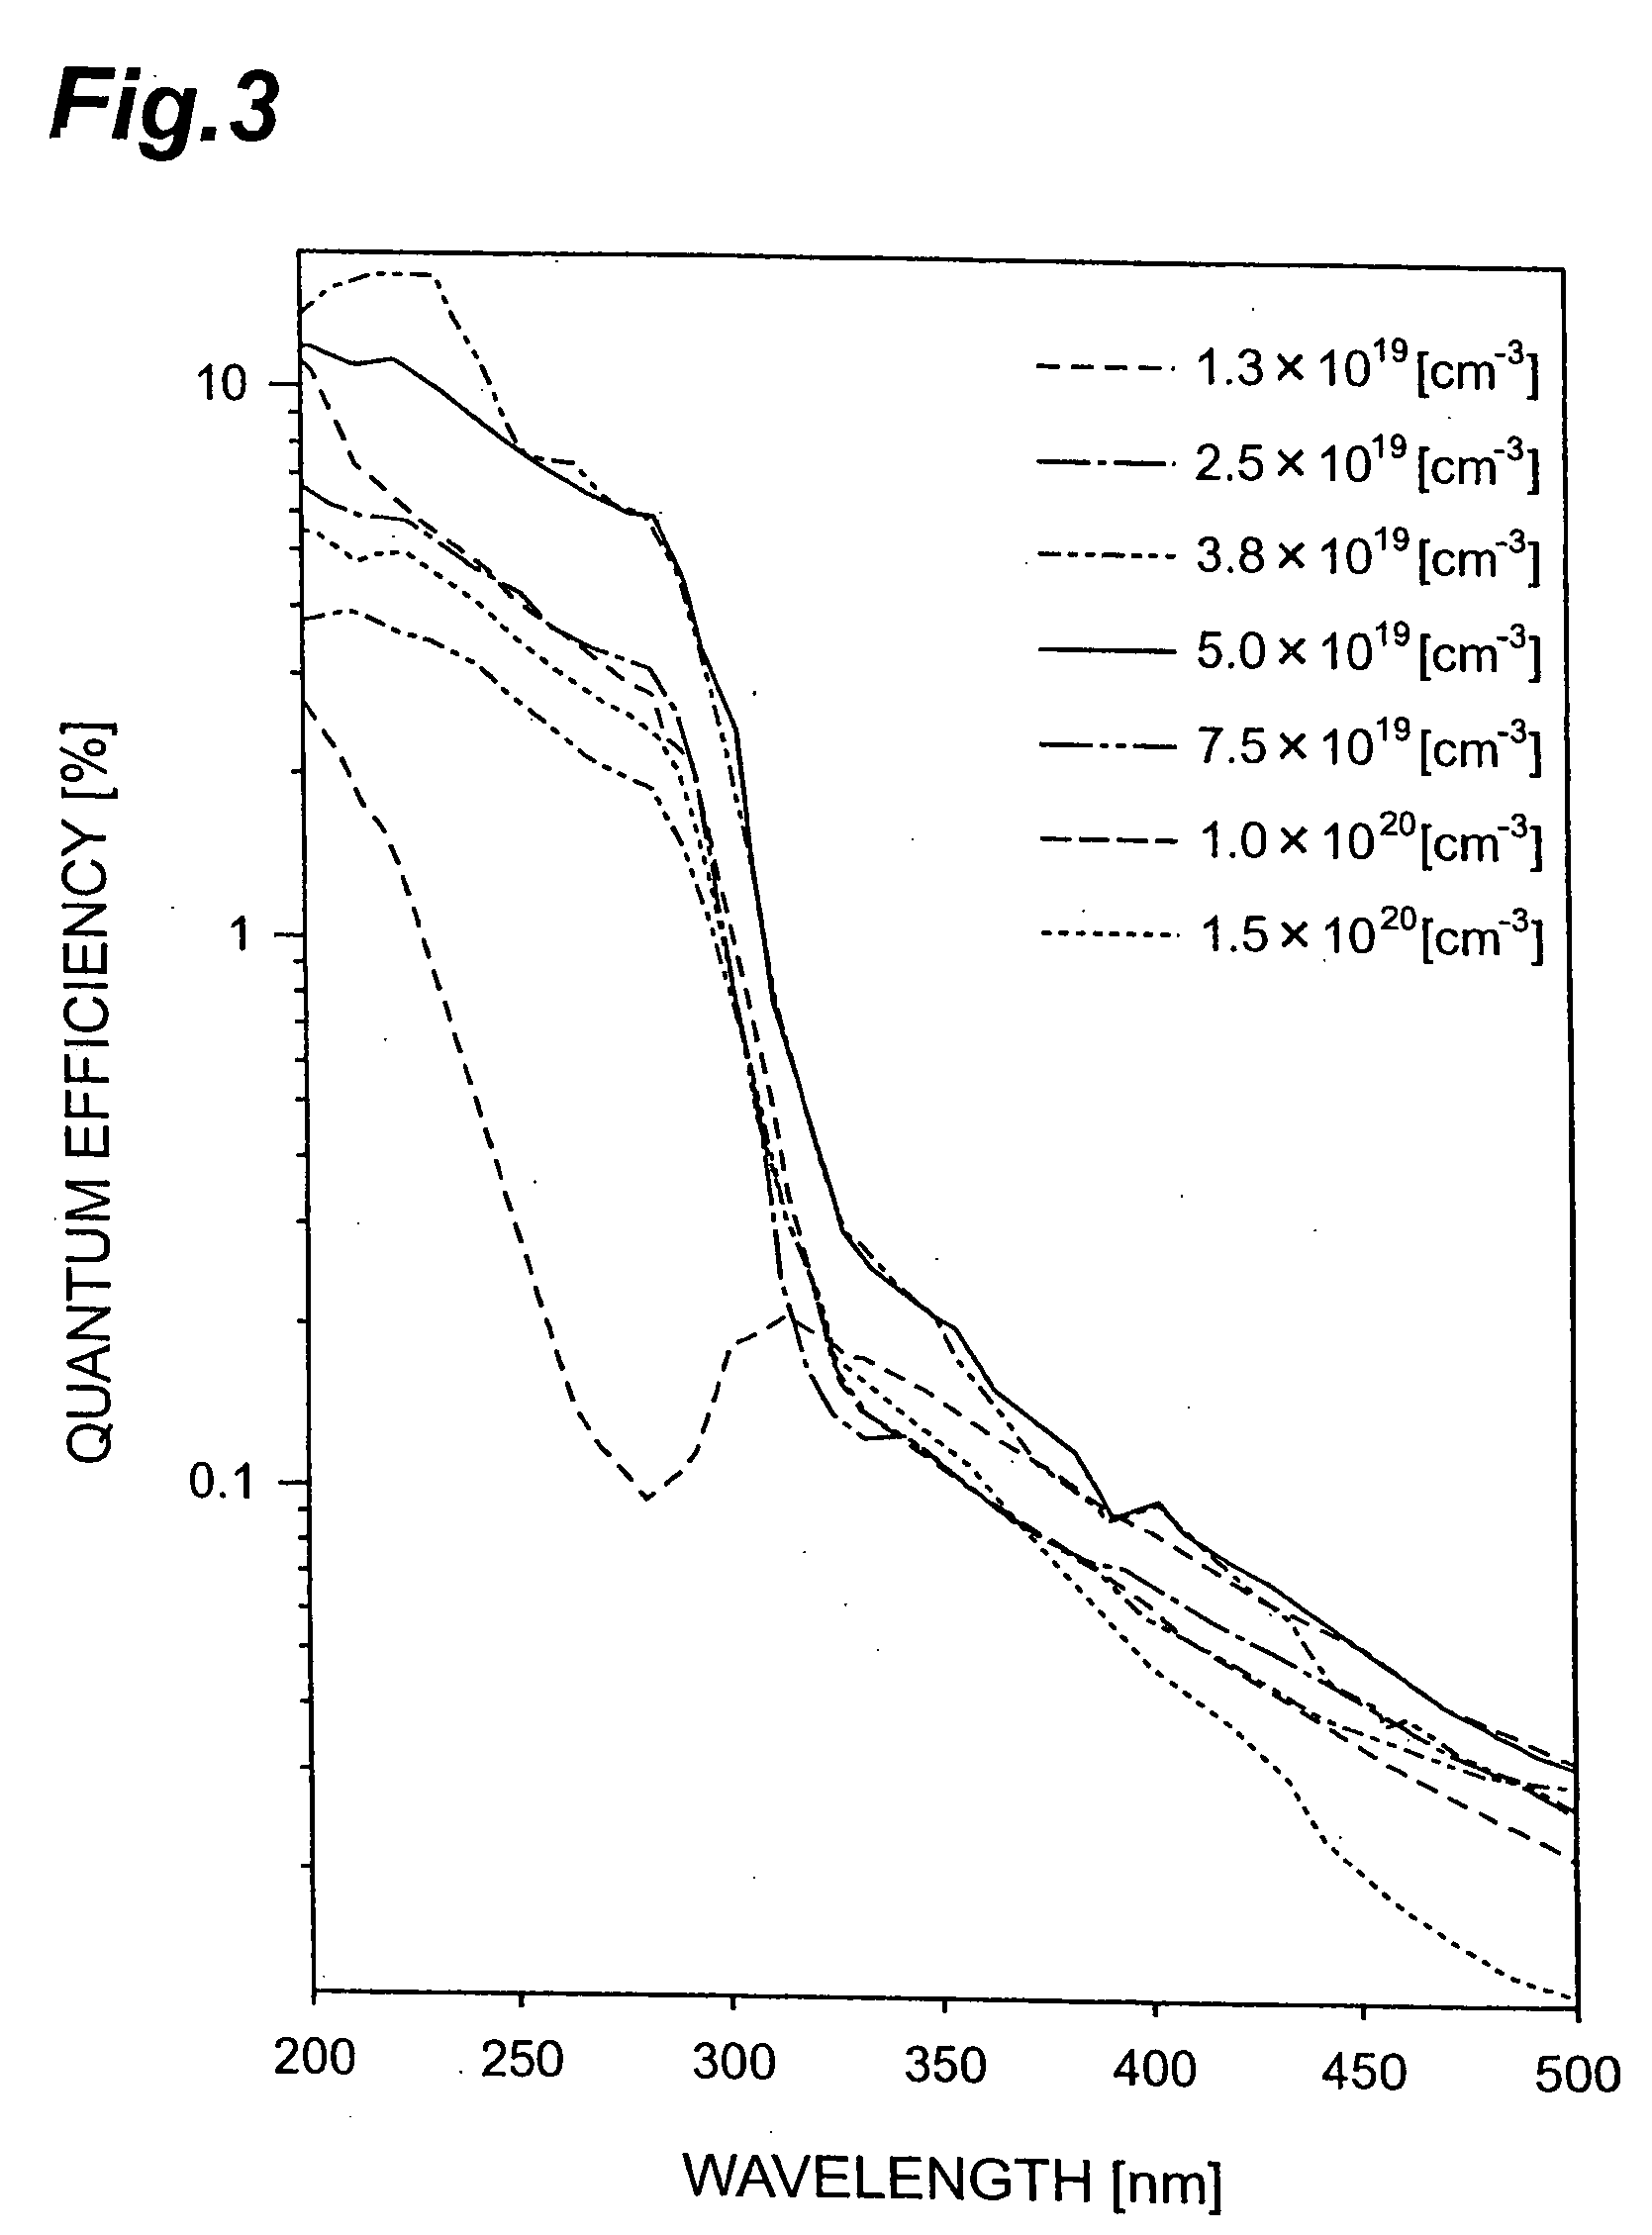 Photocathode having A1GaN layer with specified Mg content concentration